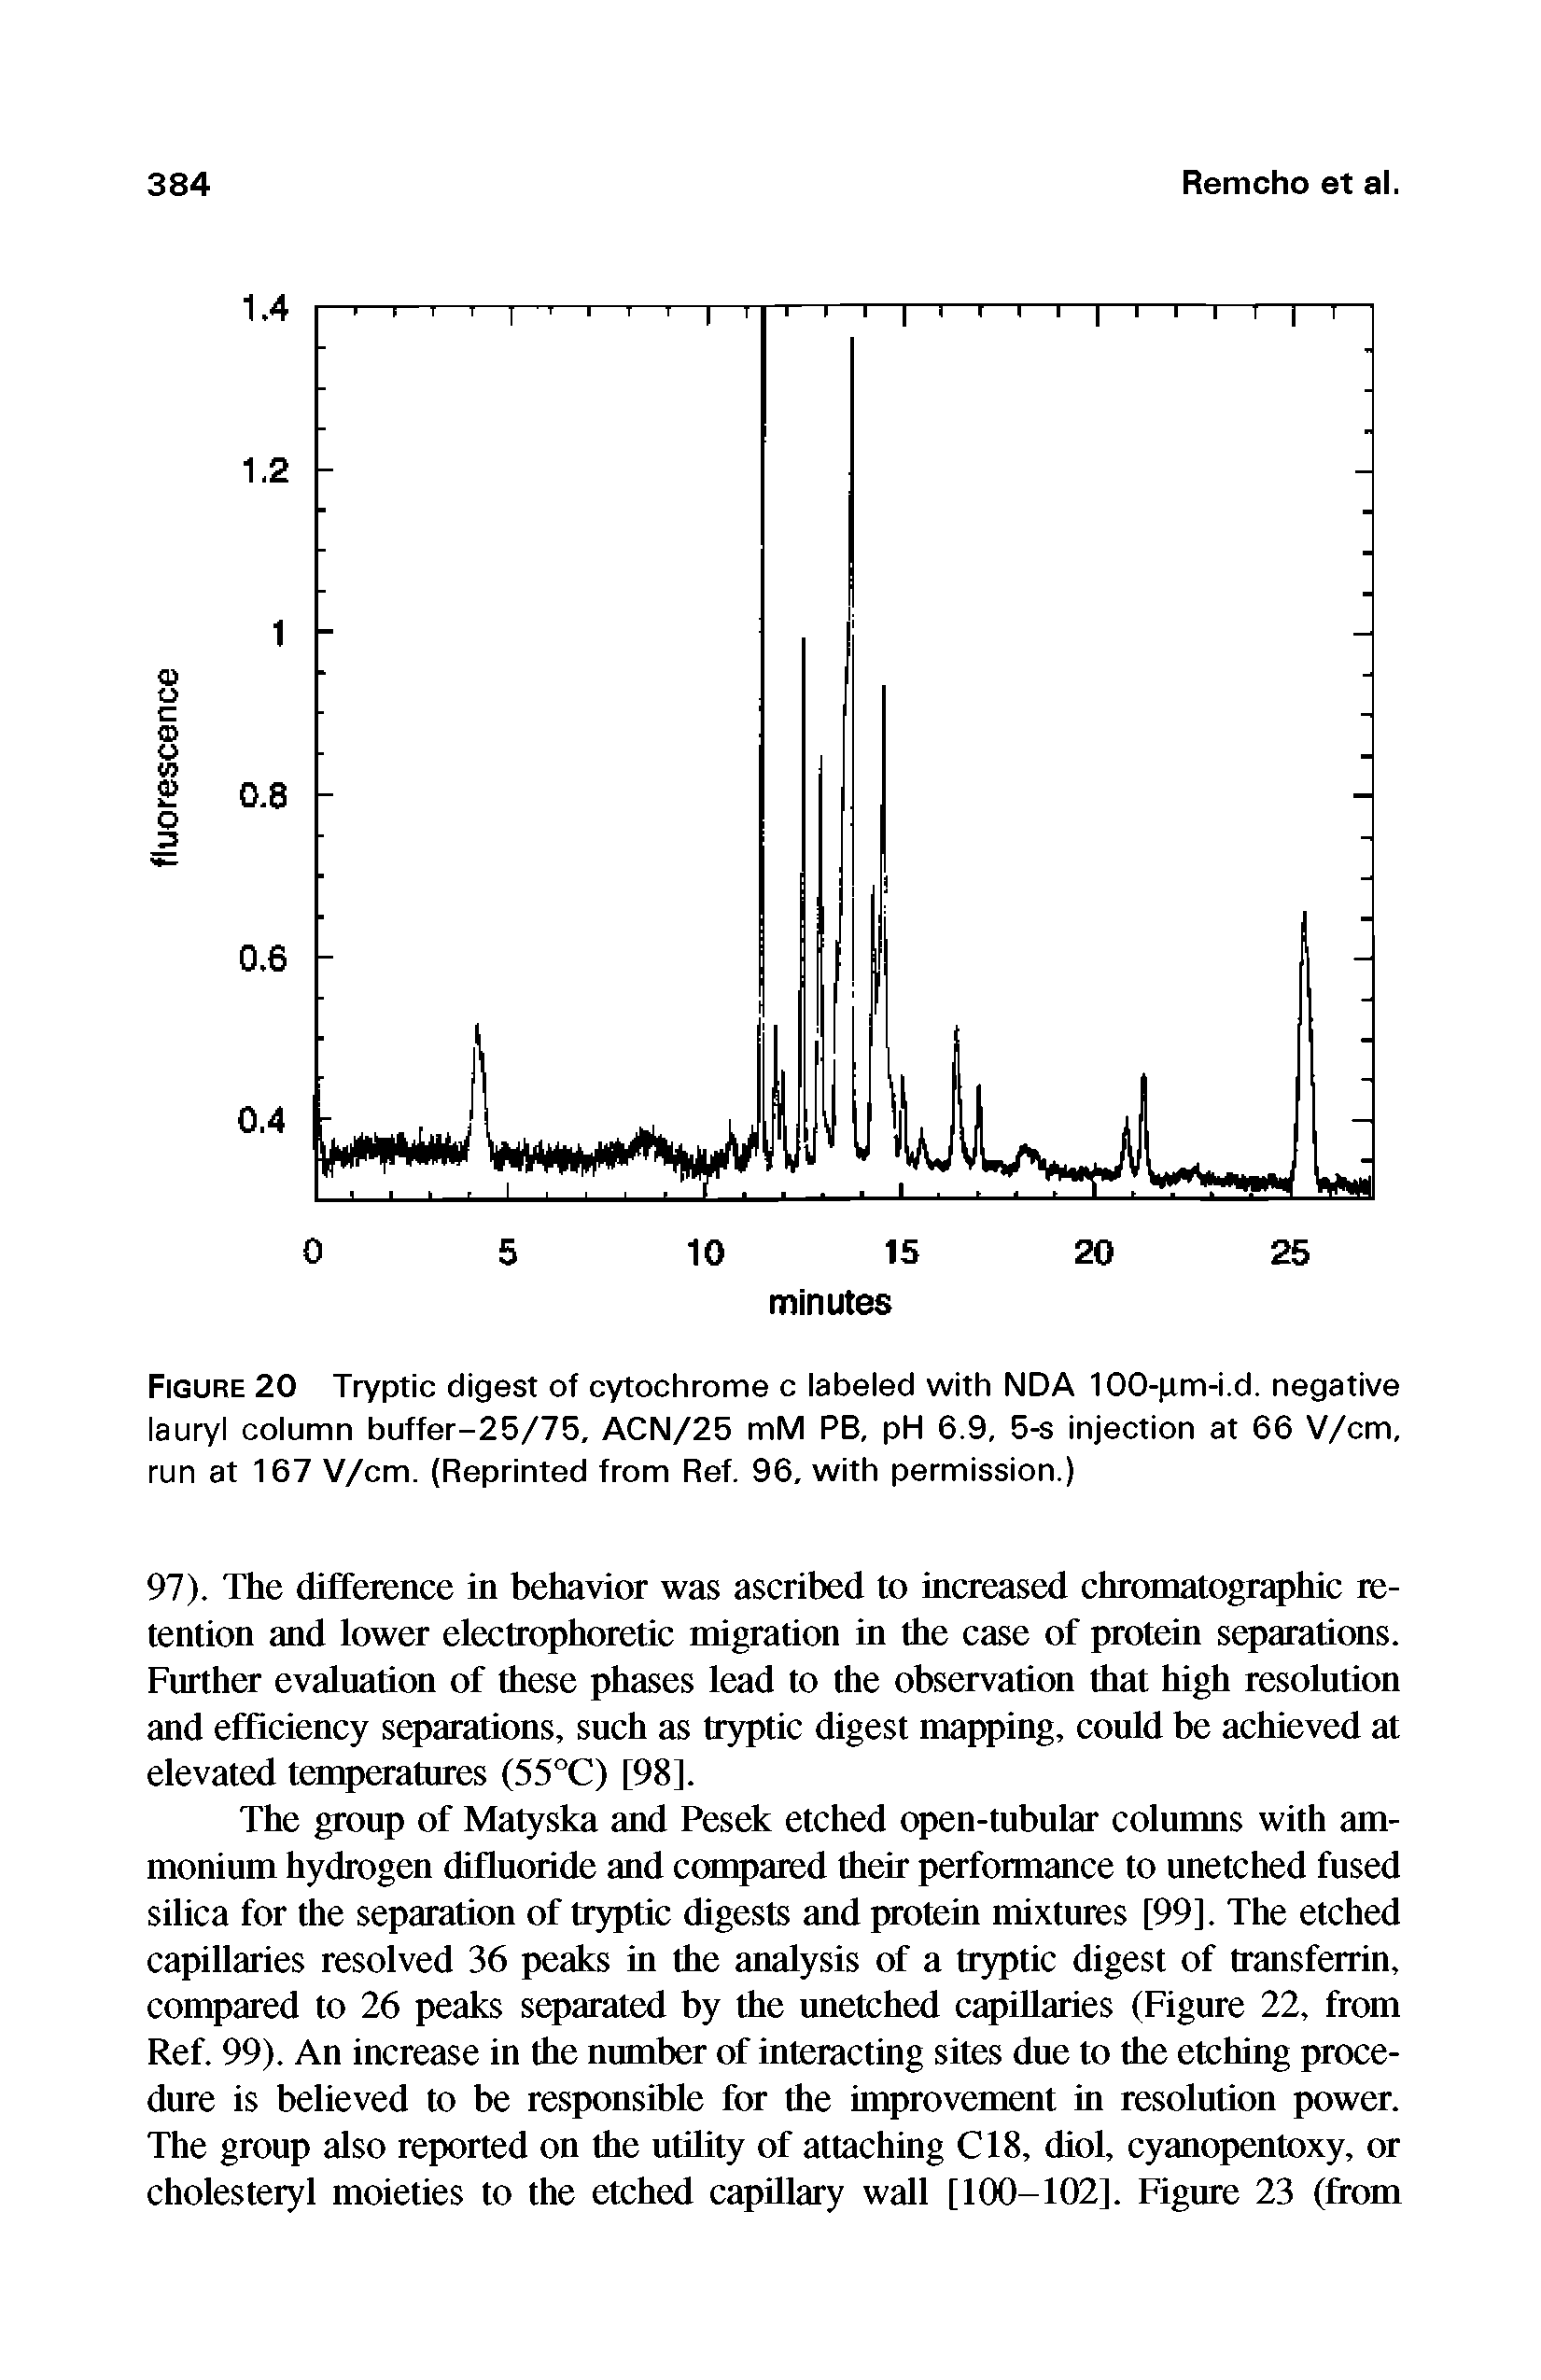 Figure 20 Tryptic digest of cytochrome c labeled with NDA 100-pm-i.d. negative lauryl column buffer-25/75, ACN/25 mM PB, pH 6.9, 5-s injection at 66 V/cm, run at 167 V/cm. (Reprinted from Ref. 96, with permission.)...